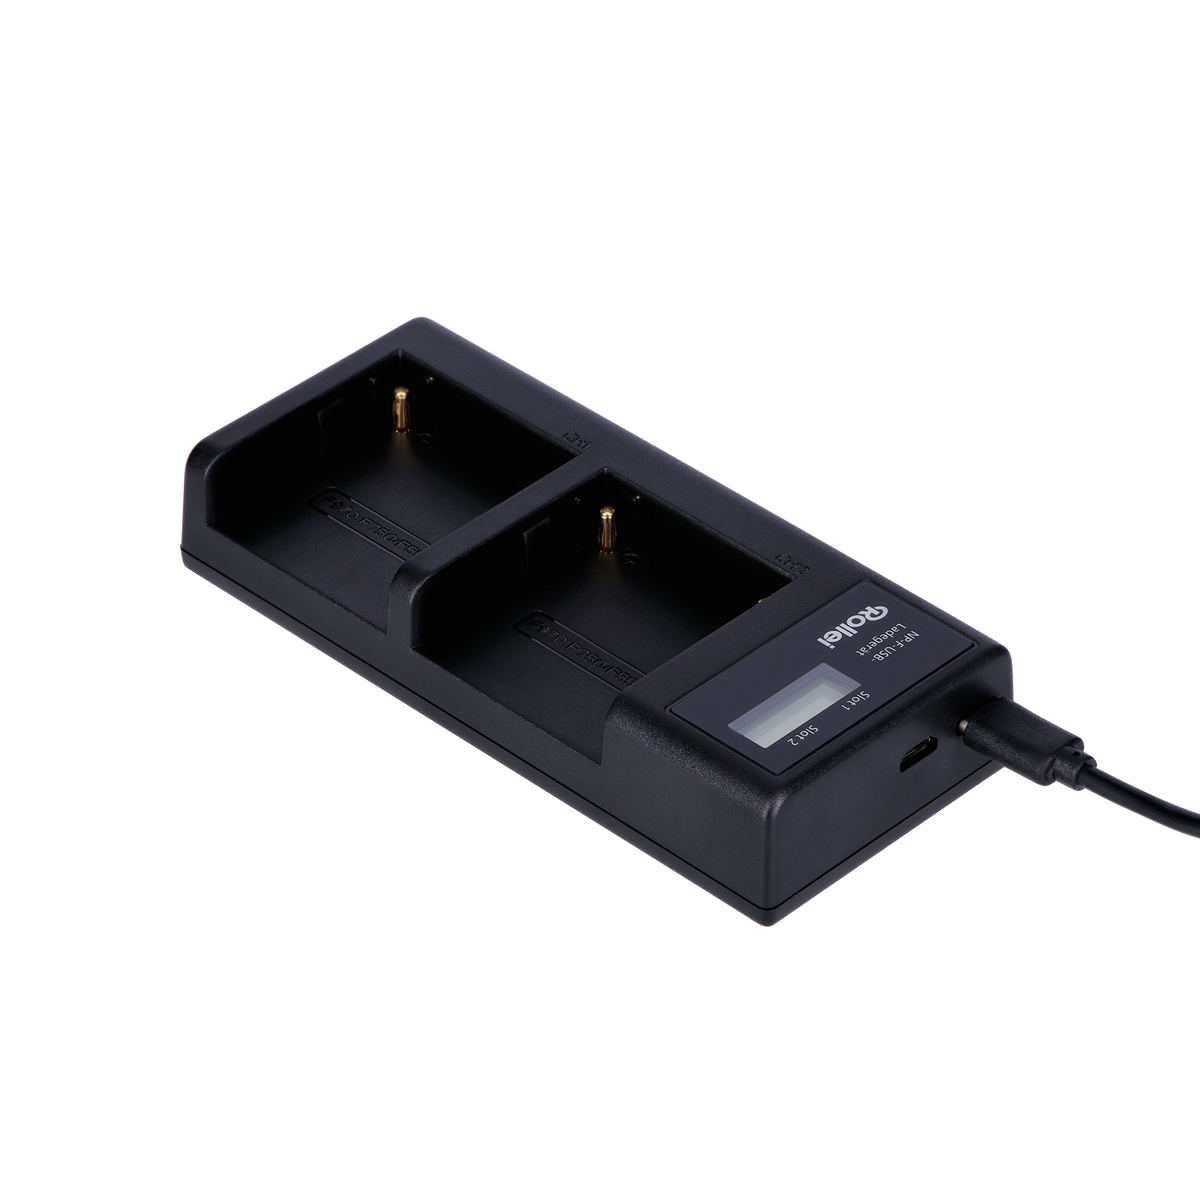 Battery charger for NP-F batteries